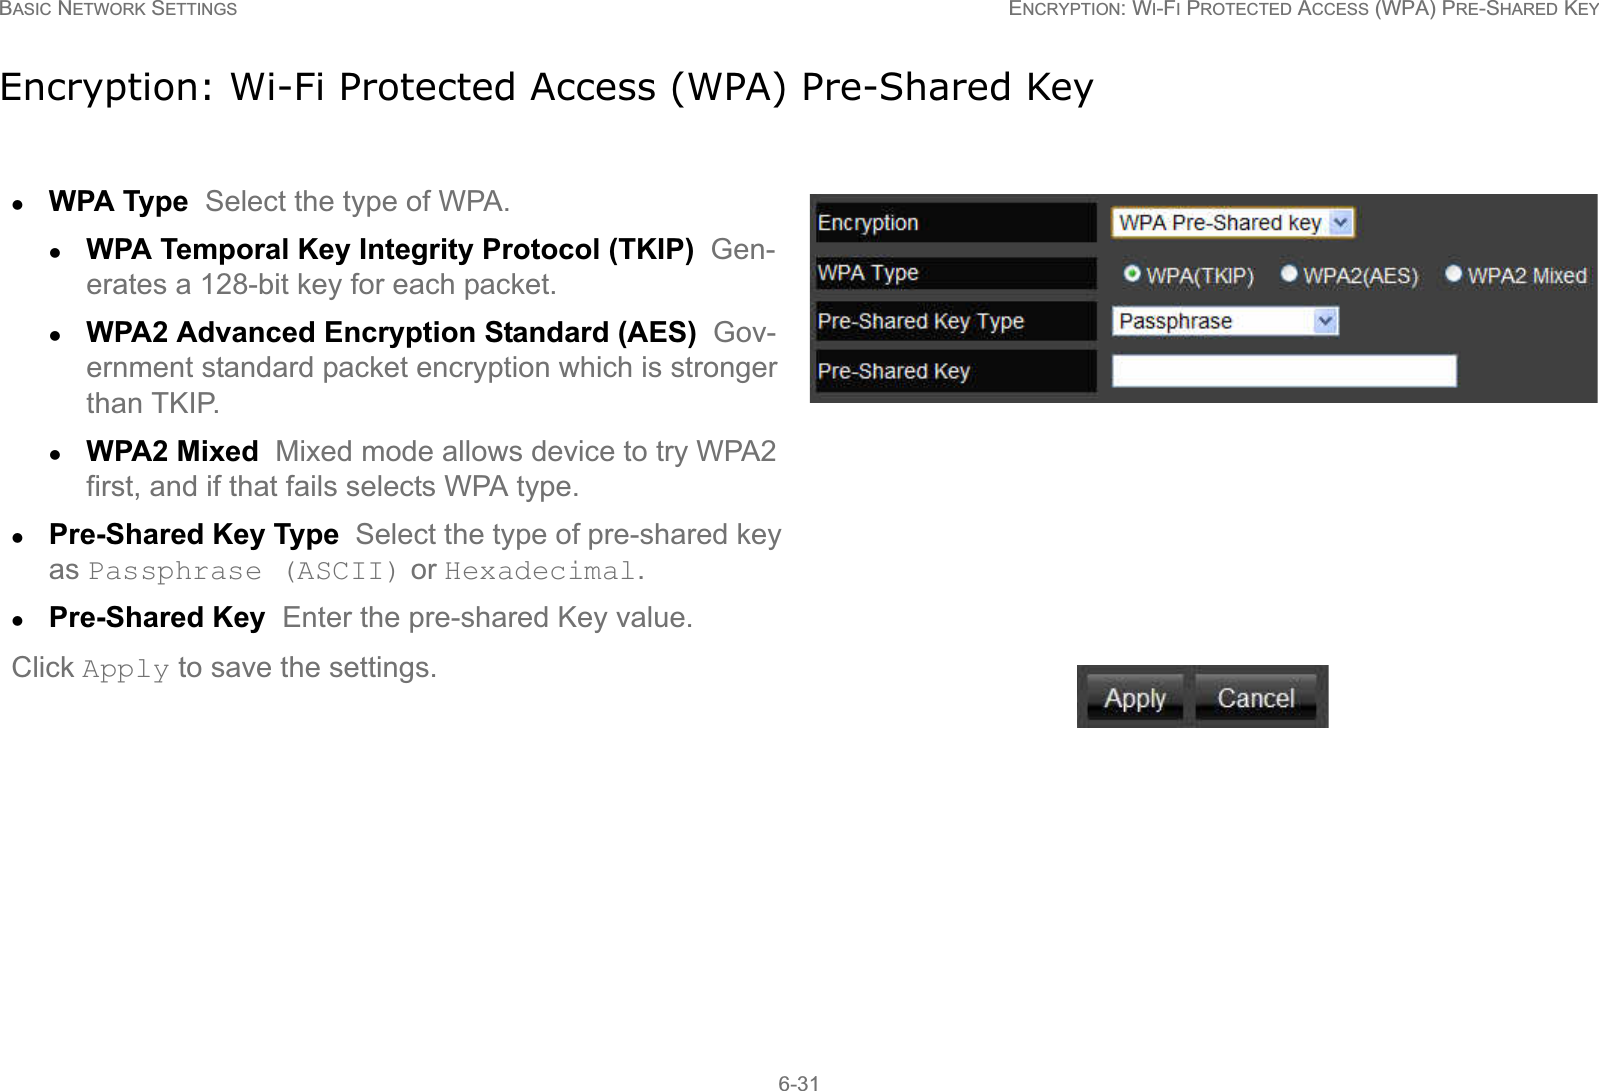 BASIC NETWORK SETTINGS ENCRYPTION: WI-FI PROTECTED ACCESS (WPA) PRE-SHARED KEY6-31Encryption: Wi-Fi Protected Access (WPA) Pre-Shared KeyzWPA Type  Select the type of WPA. zWPA Temporal Key Integrity Protocol (TKIP)  Gen-erates a 128-bit key for each packet.zWPA2 Advanced Encryption Standard (AES)  Gov-ernment standard packet encryption which is stronger than TKIP.zWPA2 Mixed  Mixed mode allows device to try WPA2 first, and if that fails selects WPA type.zPre-Shared Key Type  Select the type of pre-shared key as Passphrase (ASCII) or Hexadecimal.zPre-Shared Key  Enter the pre-shared Key value.Click Apply to save the settings.